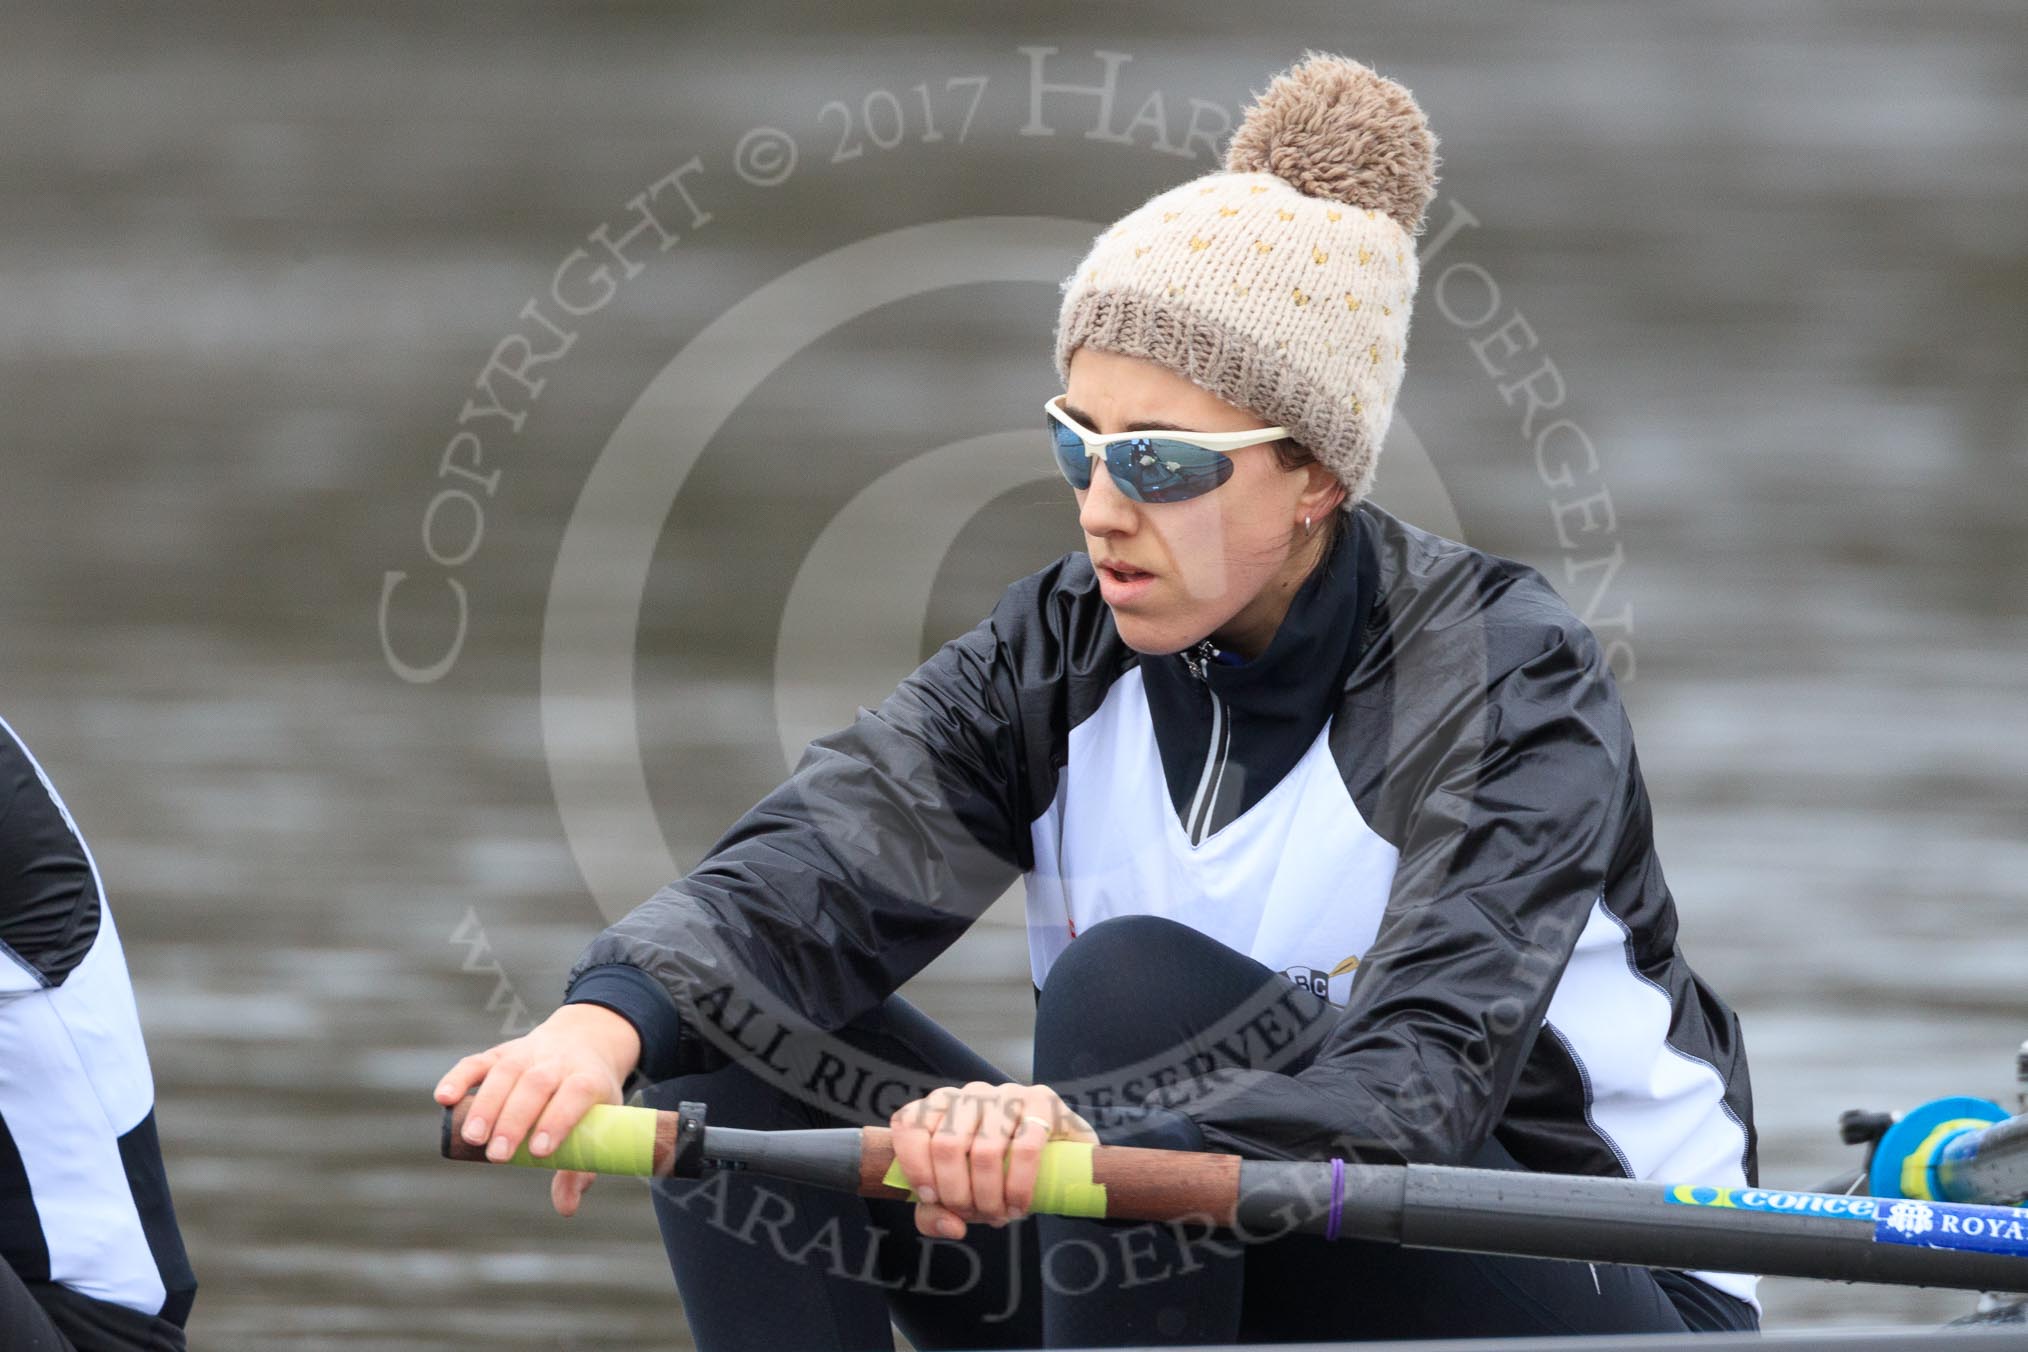 The Women's Boat Race season 2018 - fixture OUWBC vs. Molesey BC: Molesey 5 seat Ruth Whyman.
River Thames between Putney Bridge and Mortlake,
London SW15,

United Kingdom,
on 04 March 2018 at 13:34, image #35